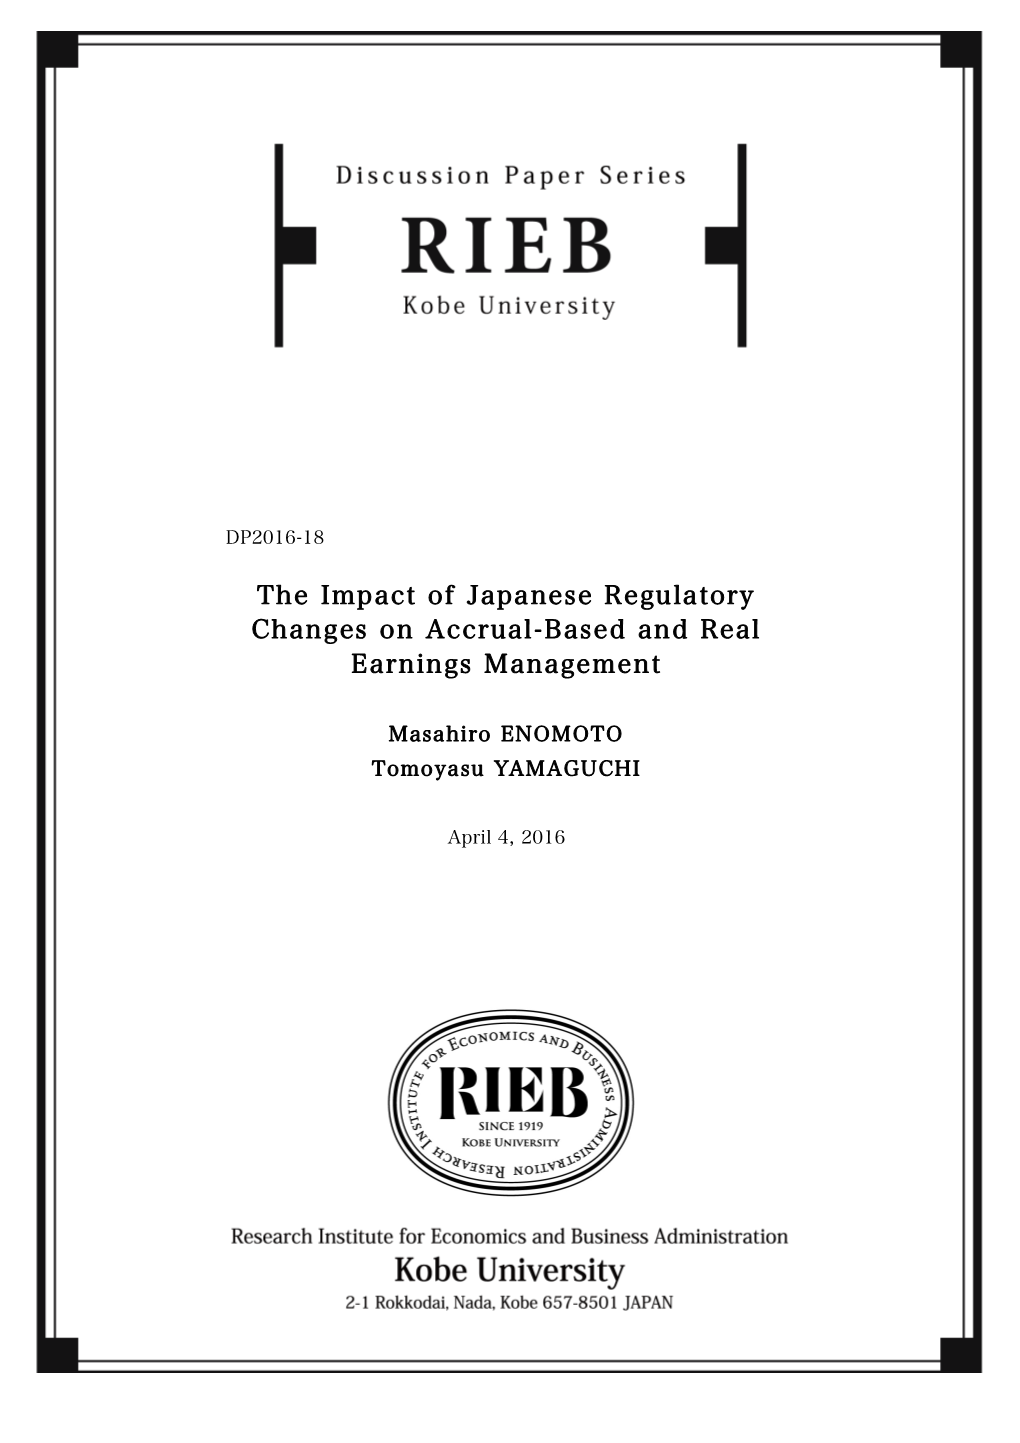 The Impact of Japanese Regulatory Changes on Accrual-Based and Real Earnings Management